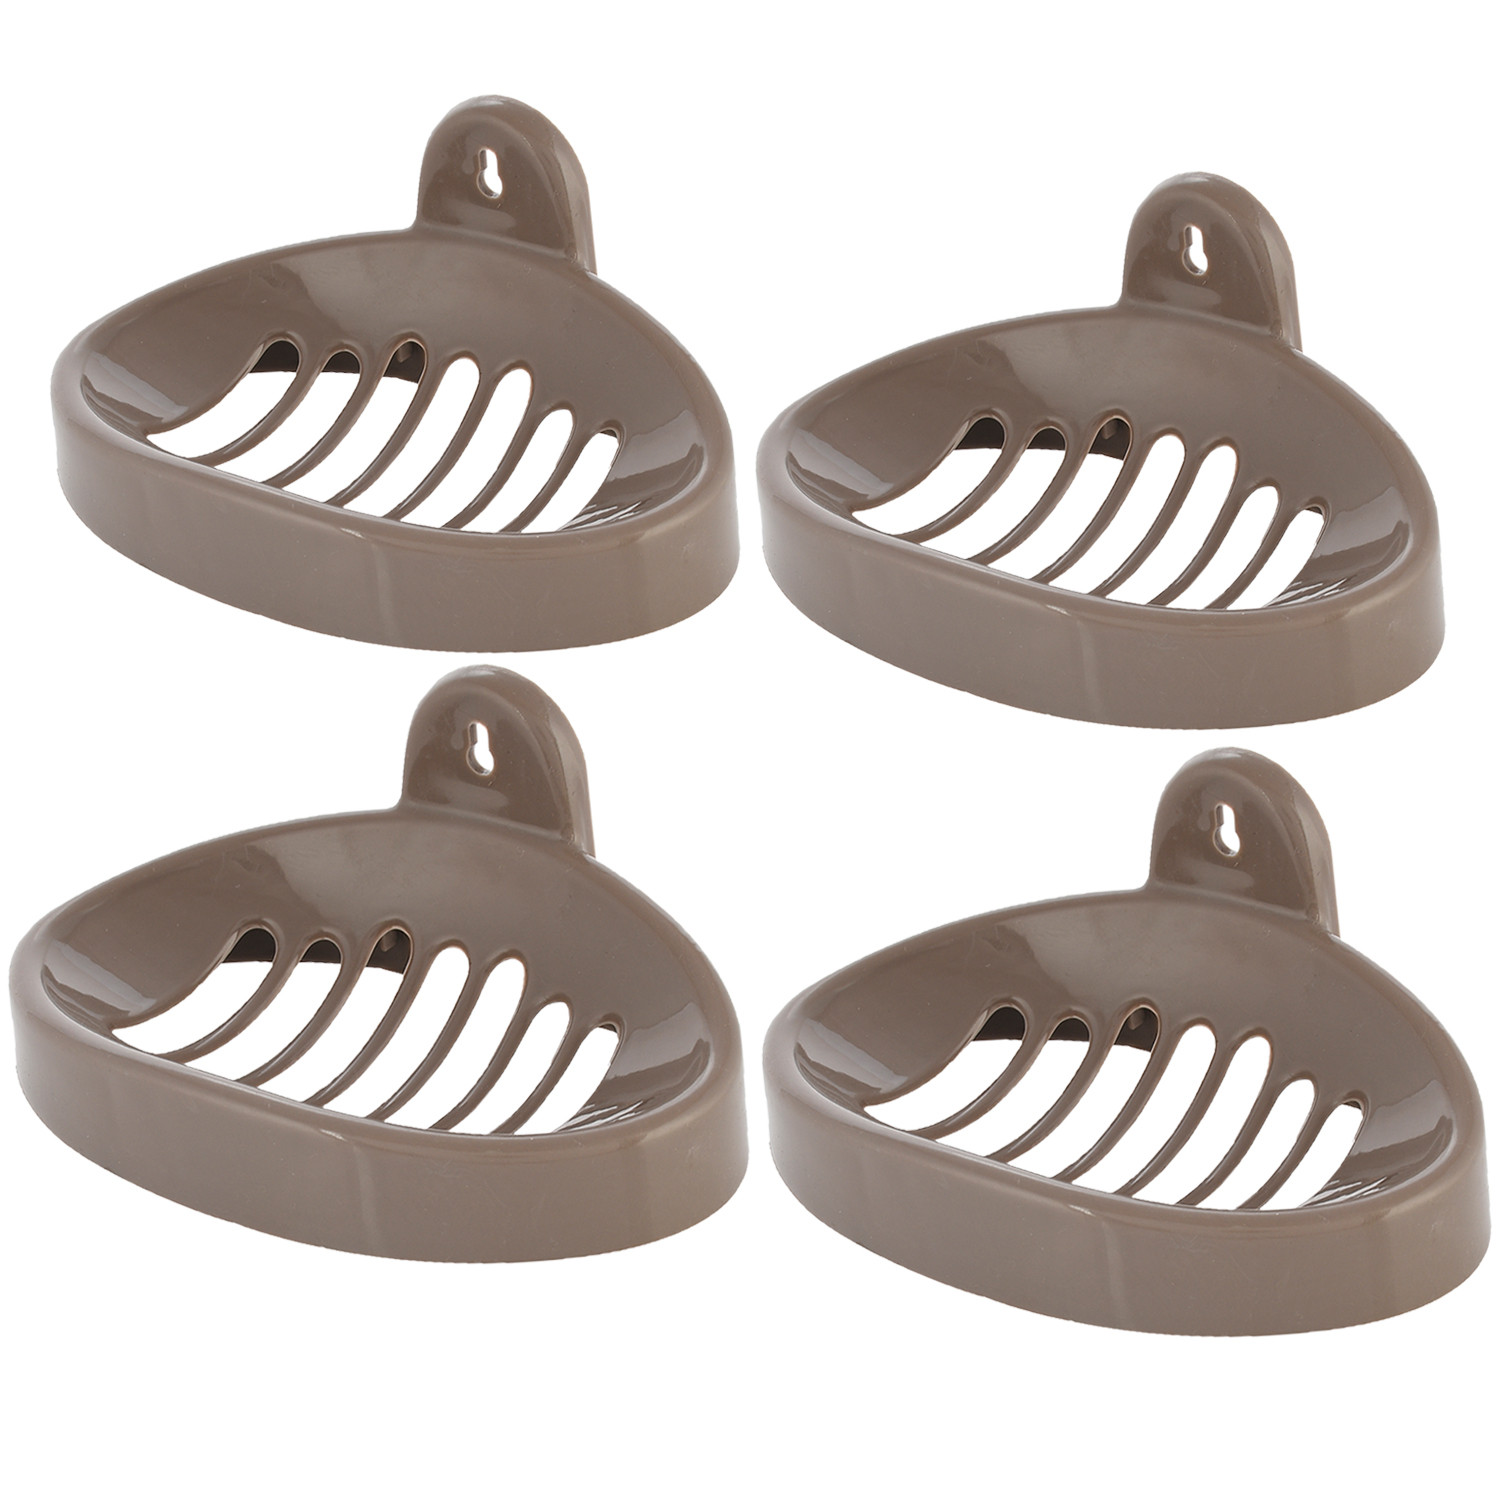 Kuber Industries Soap Holder|Sink Soap Holder|Plastic wall Mounted Soap Holder|Oval Shape Self Draining Soap Dish for Bathroom| (Brown)